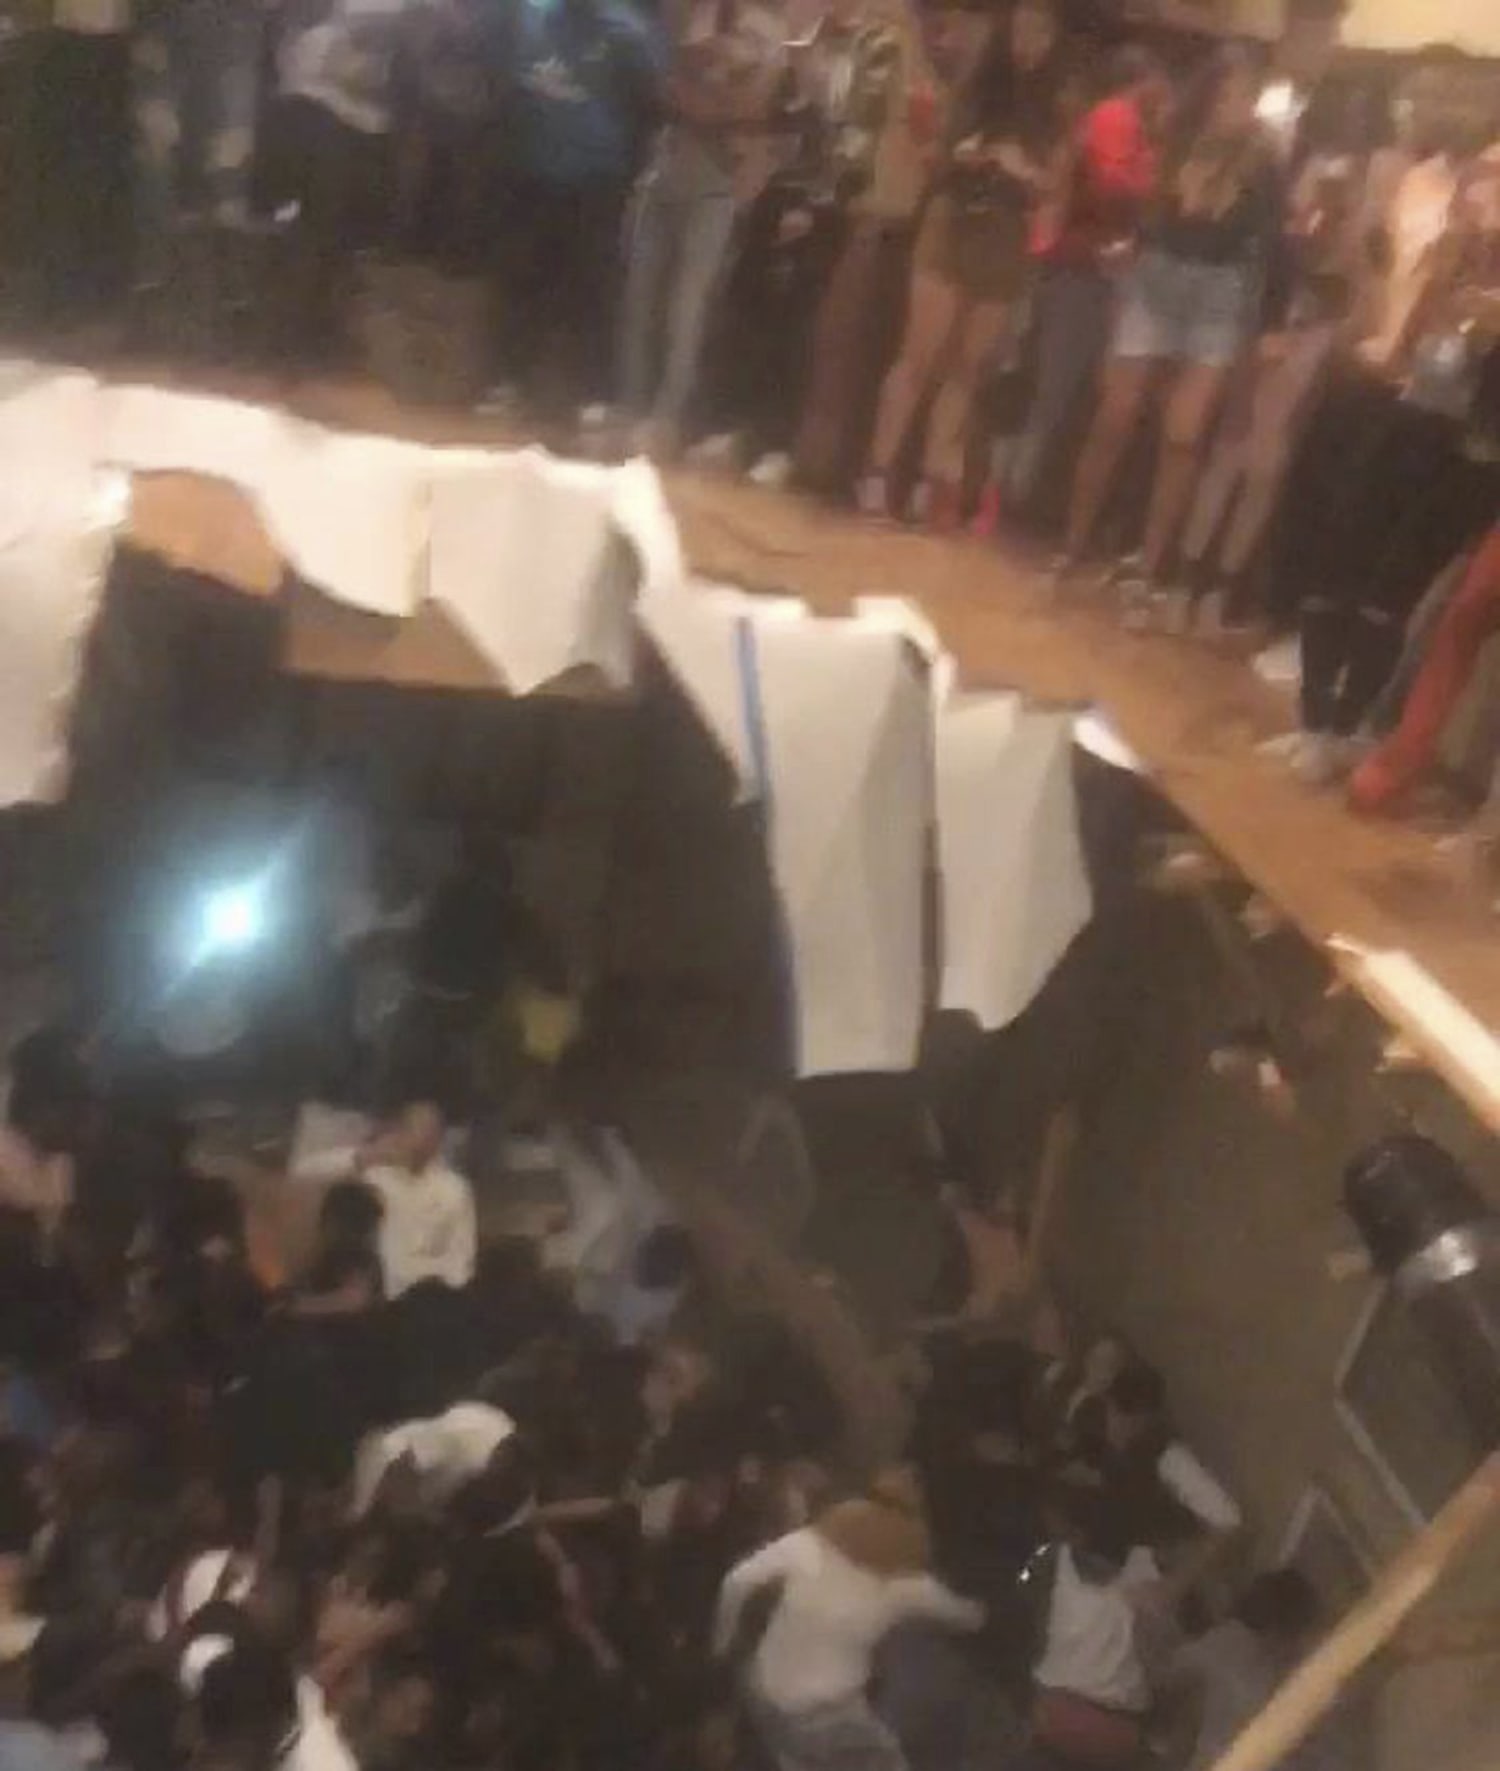 Floor Collapses At Party In South Carolina Injuring Dozens